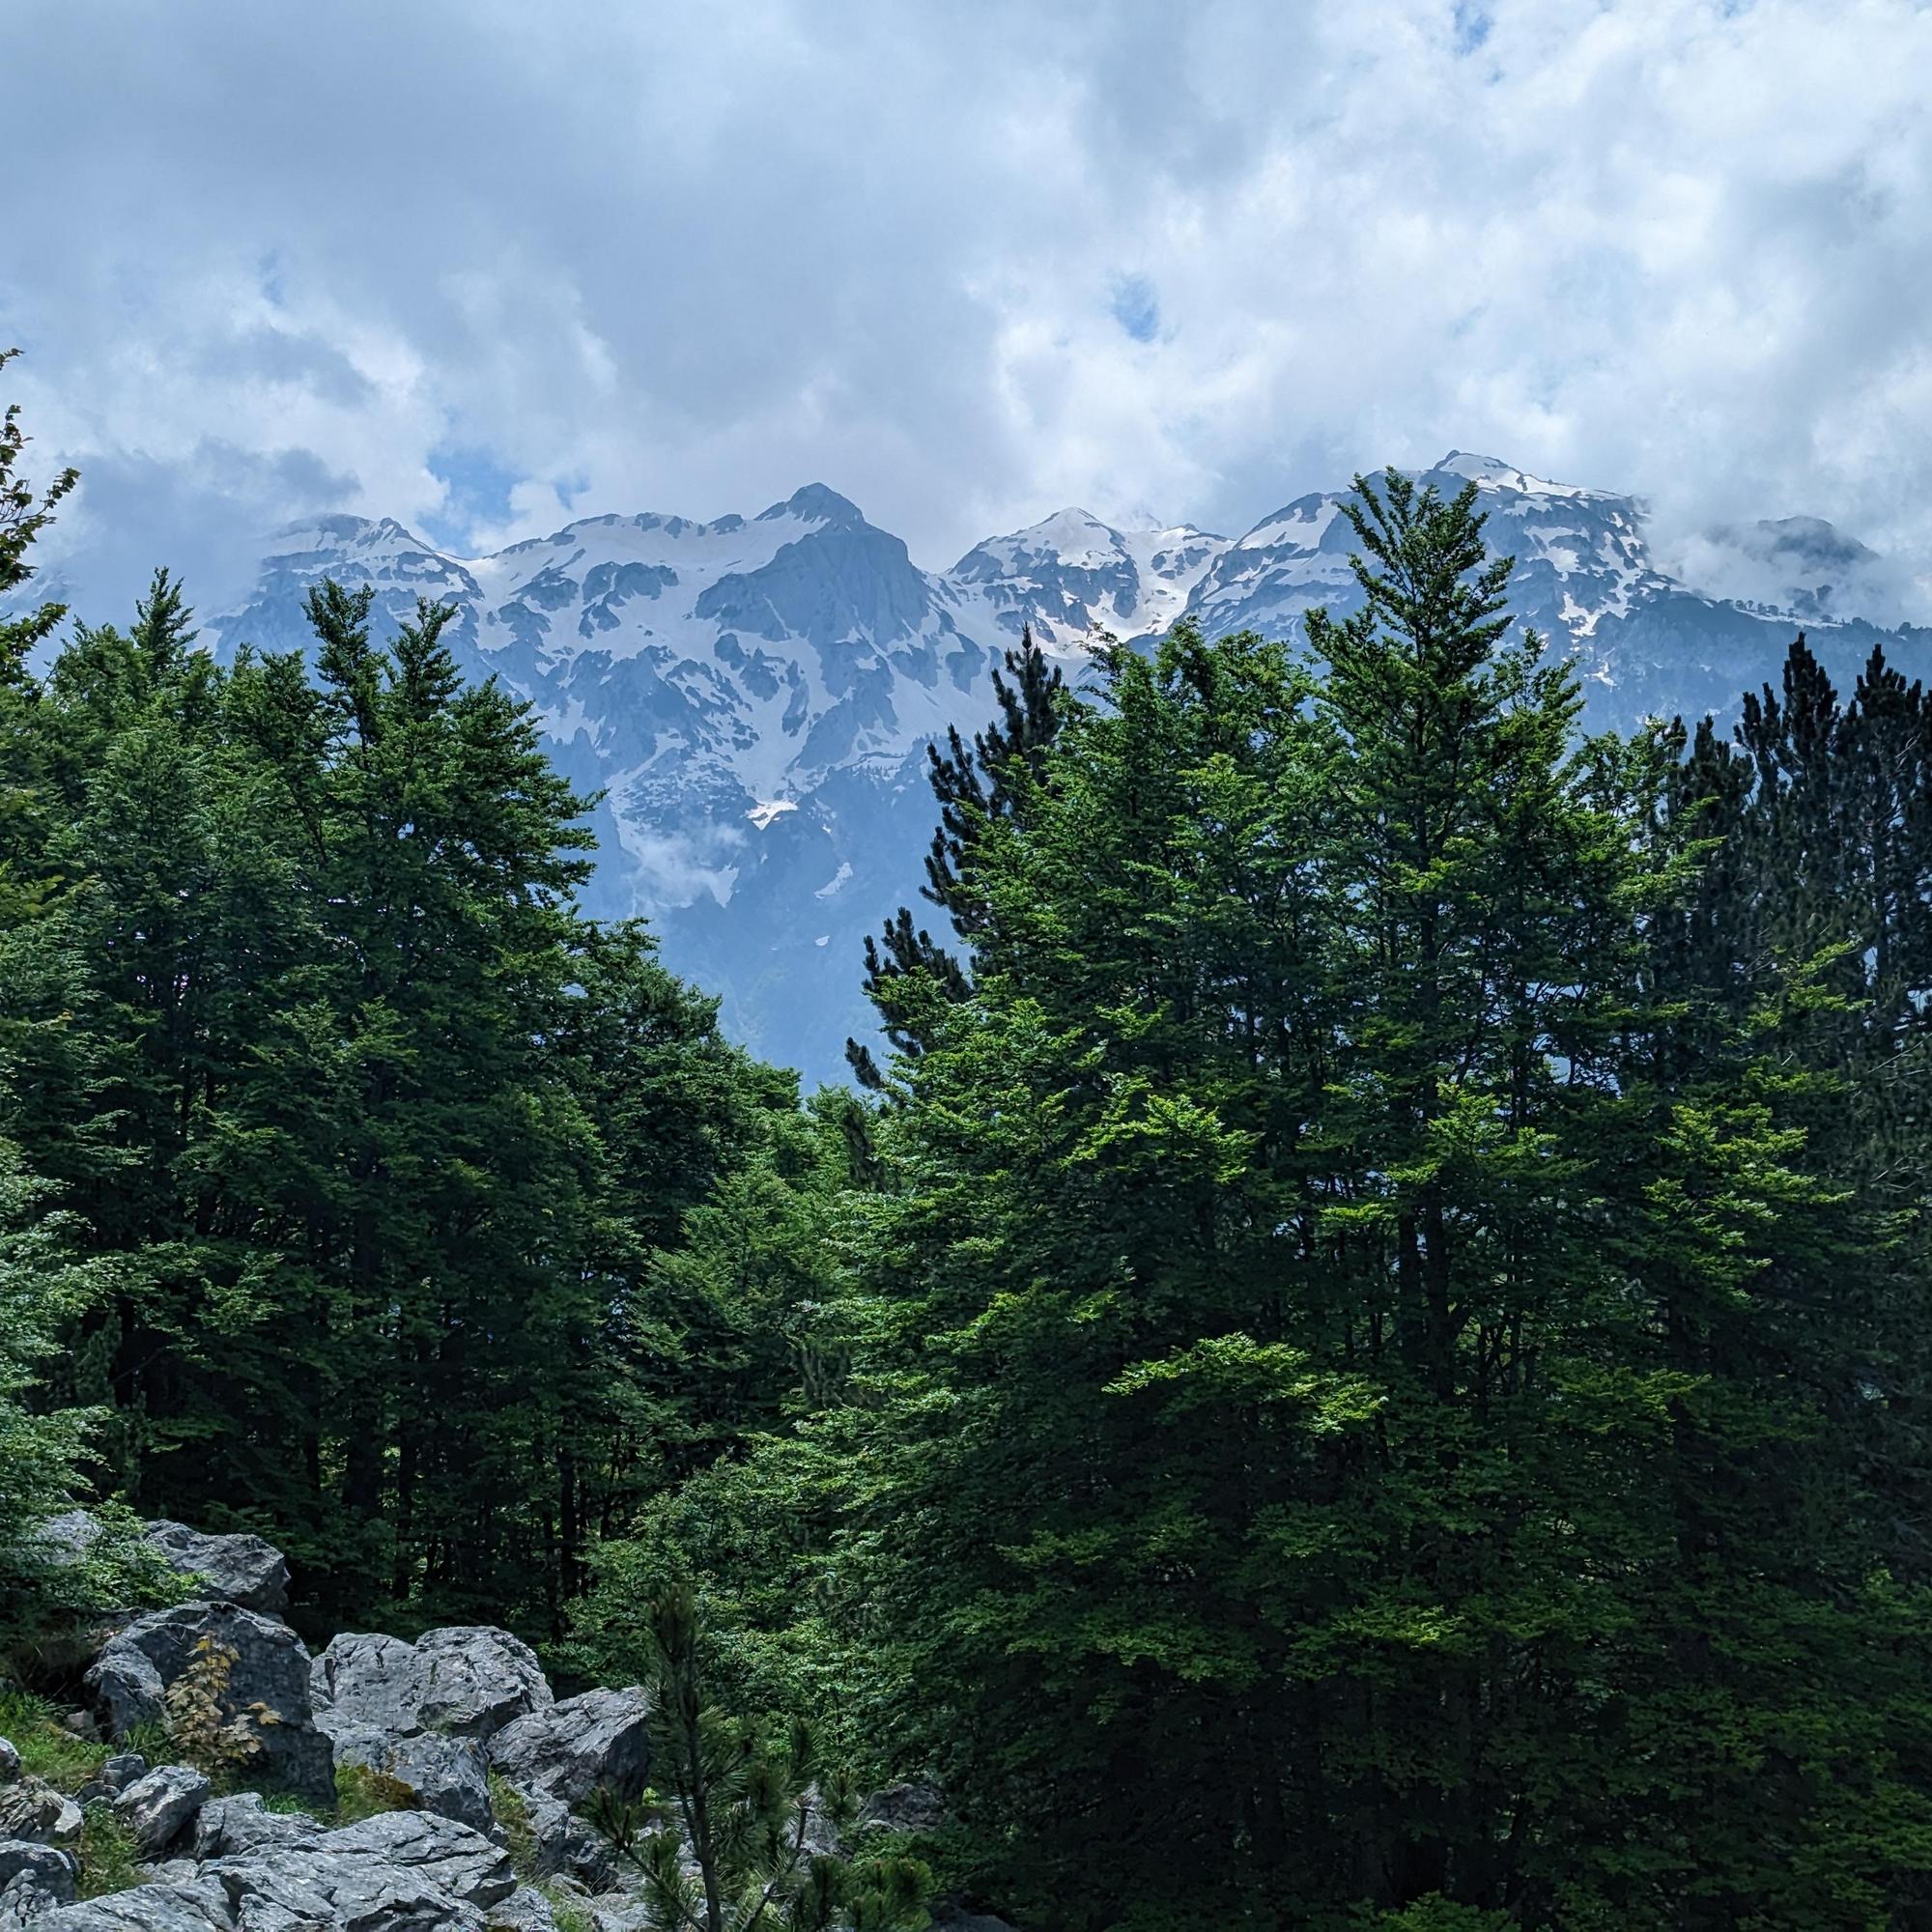 Conifers in front of snow-covered mountain peaks in Albania.